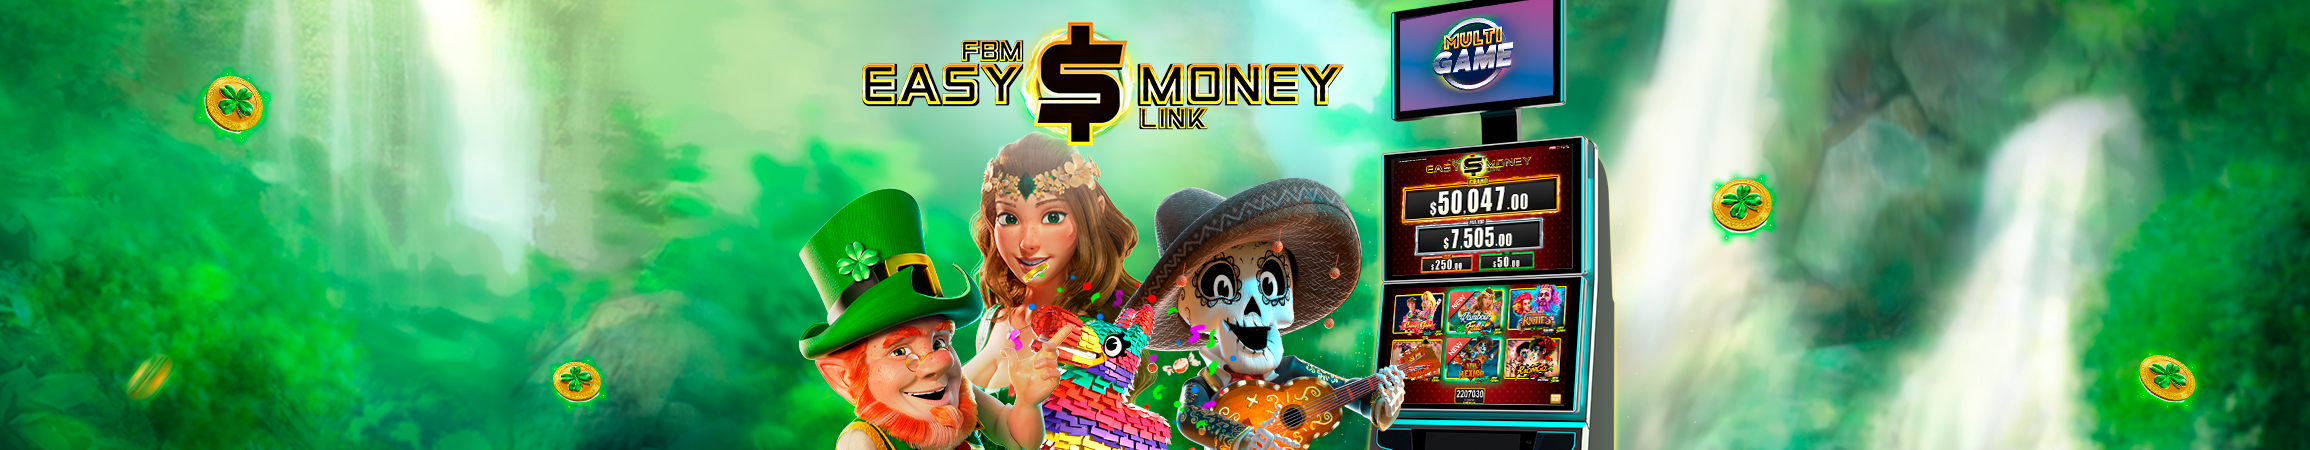 FBM Easy$Money Link brings two new games to slots’  fans in Mexico